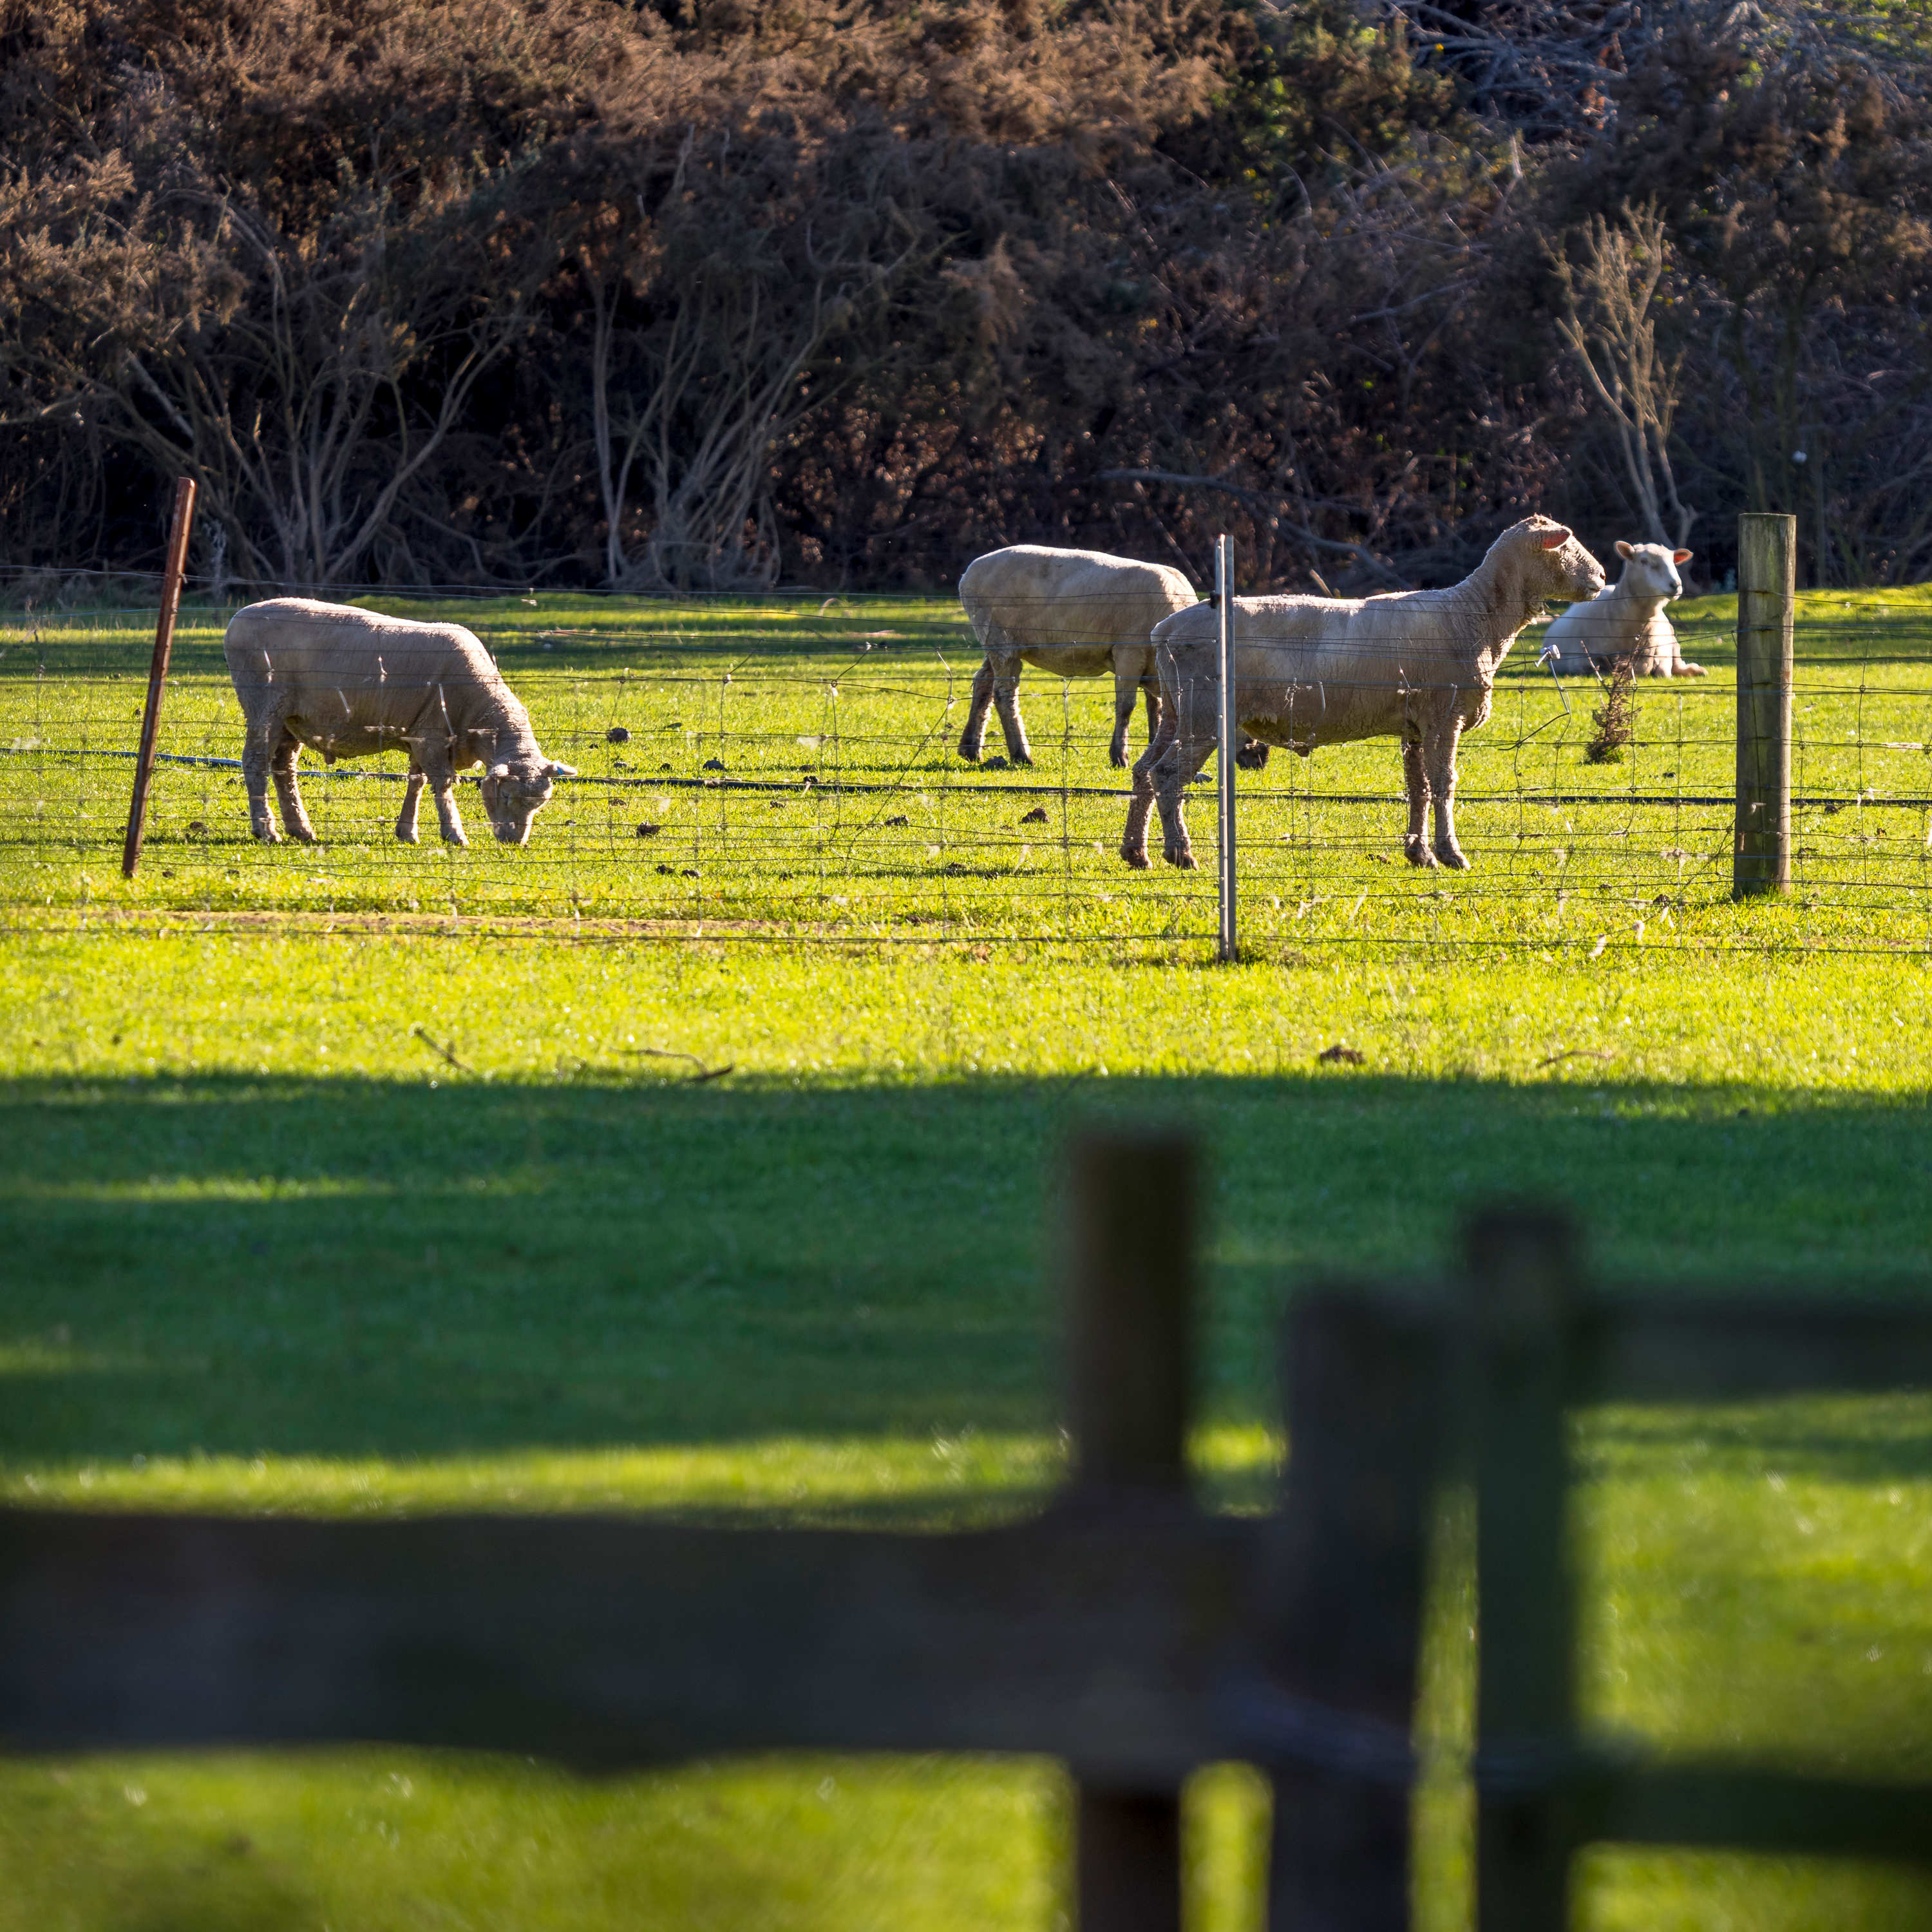 Seven shorn sheep stand in a green grass paddock with timber and wire fences in the foreground. Photo: Rob Burnett.